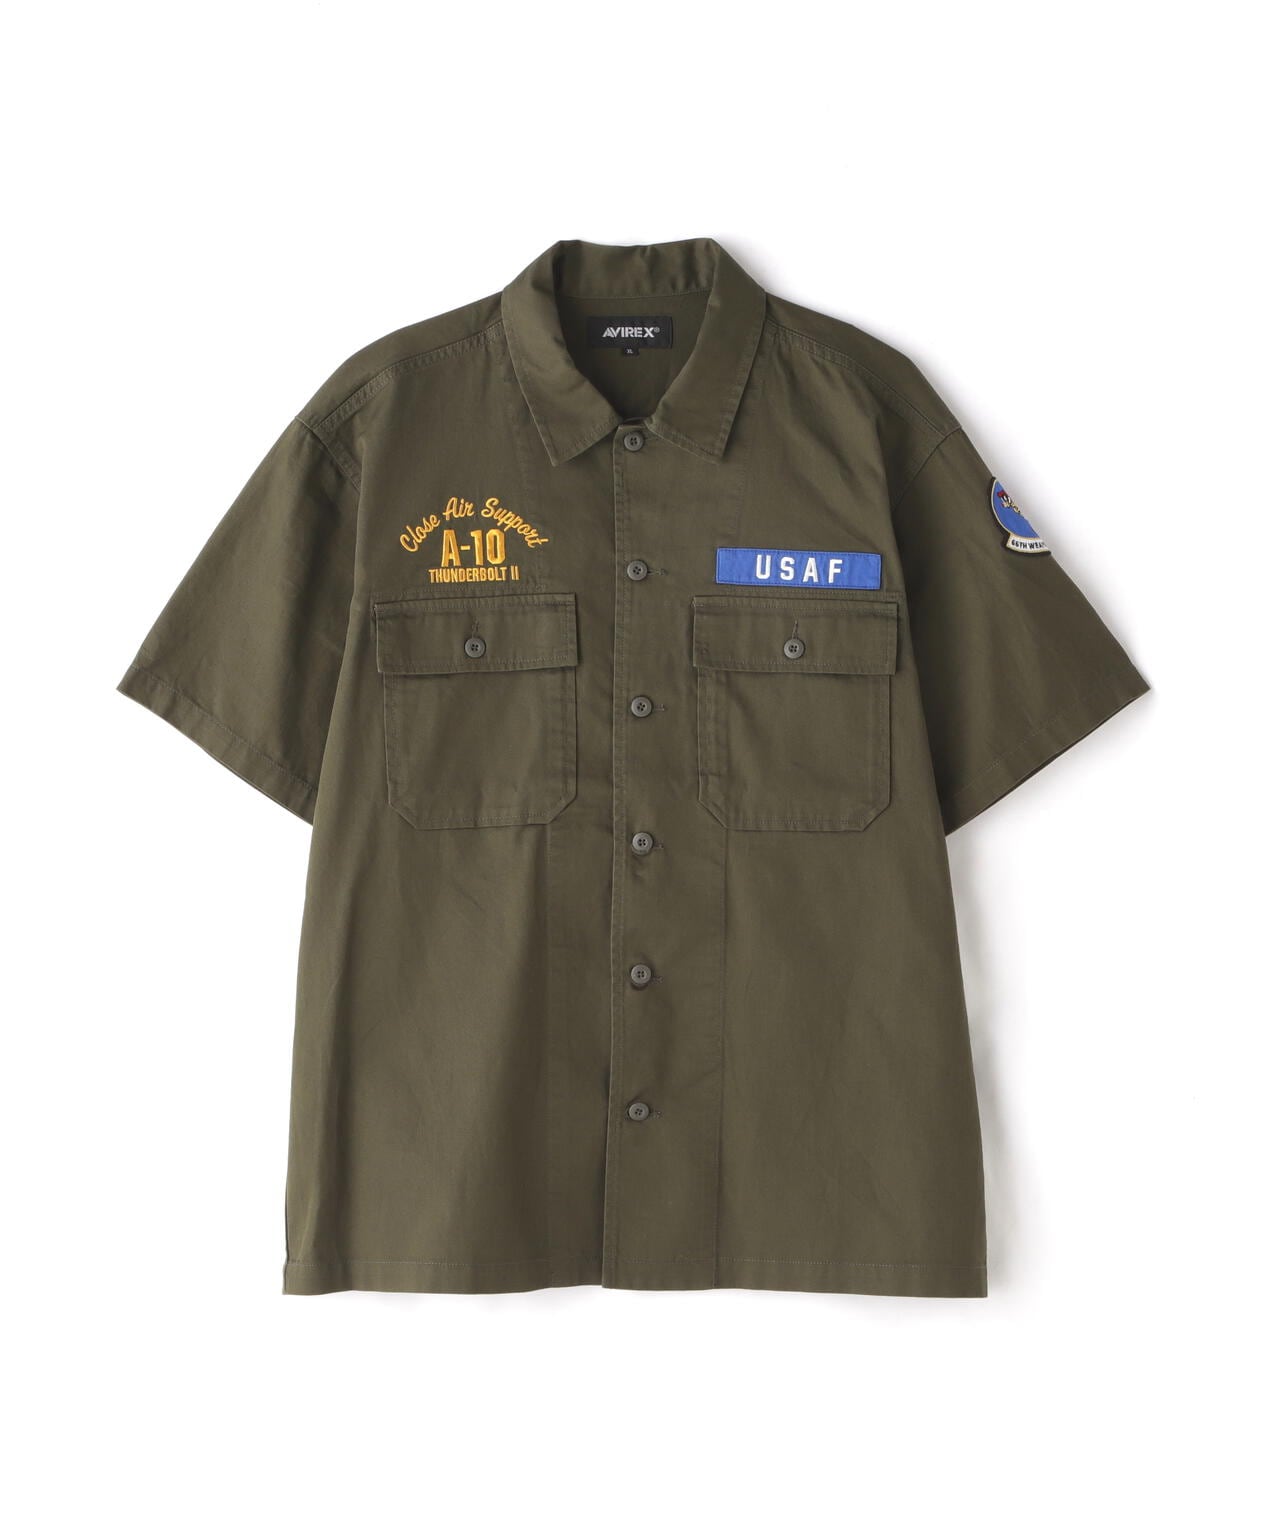 OG-107 TYPE S/S SHIRT 66th WEAPONS SQUADRON / 半袖シャツ 66th 